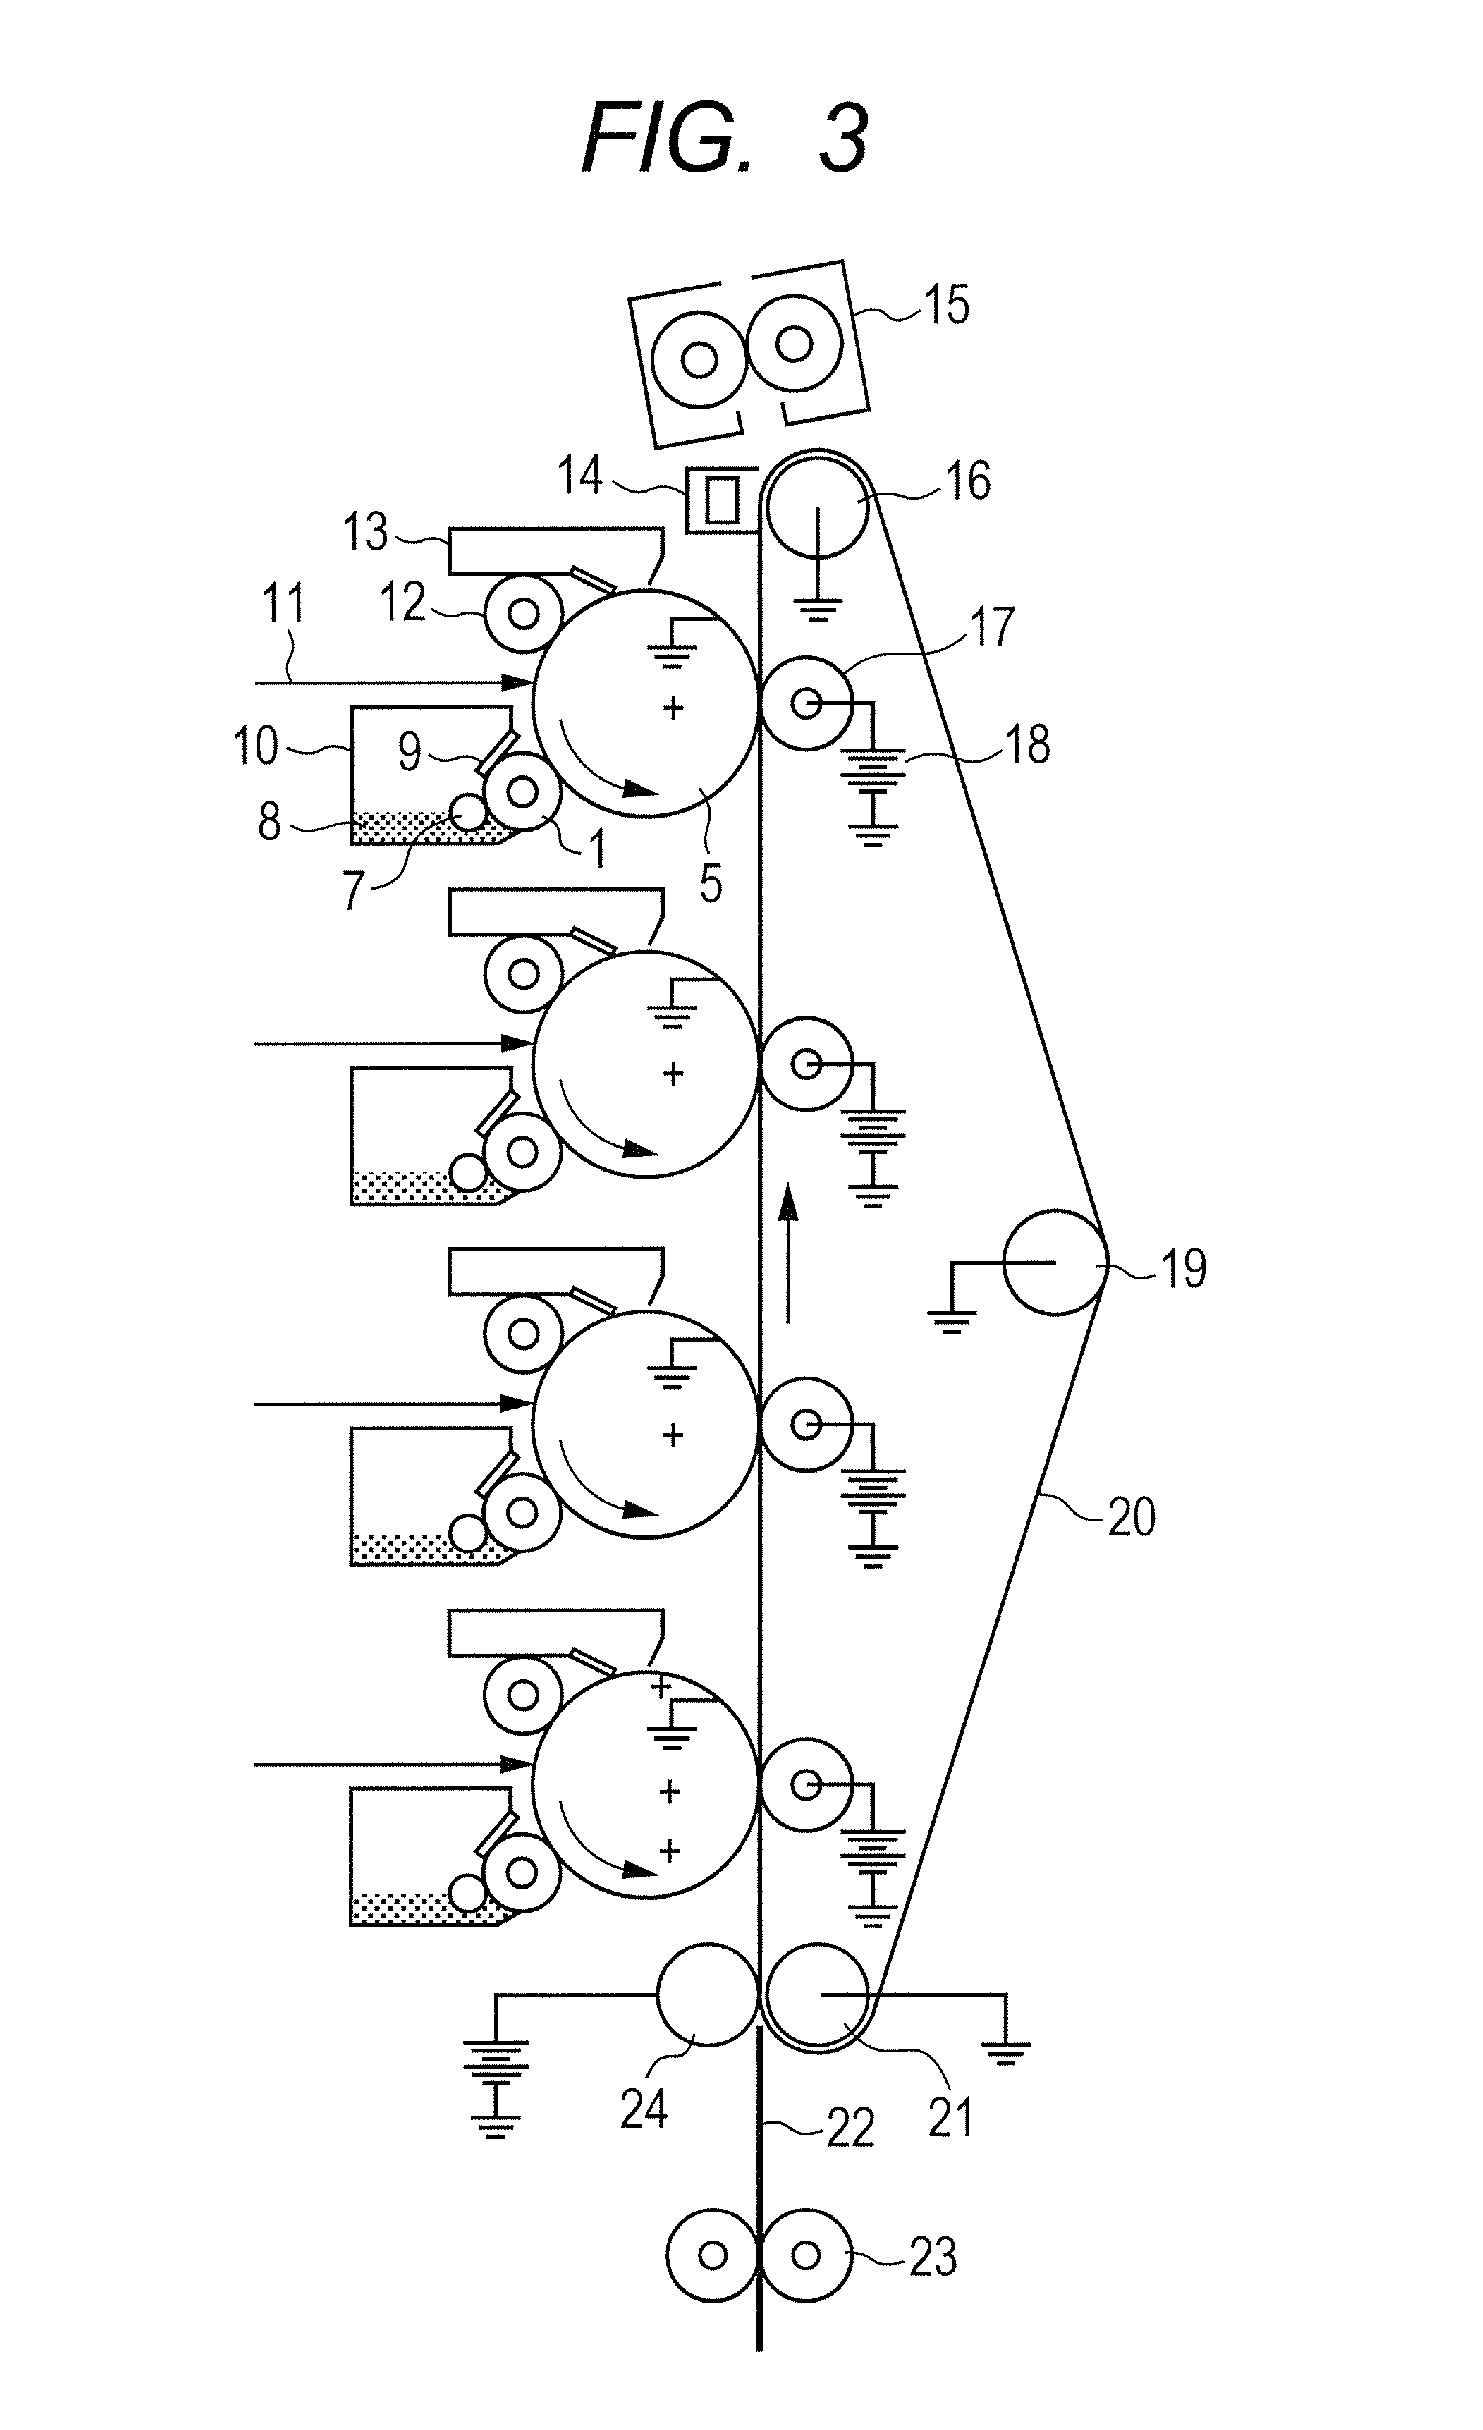 Developing member, process cartridge, and electrophotographic apparatus